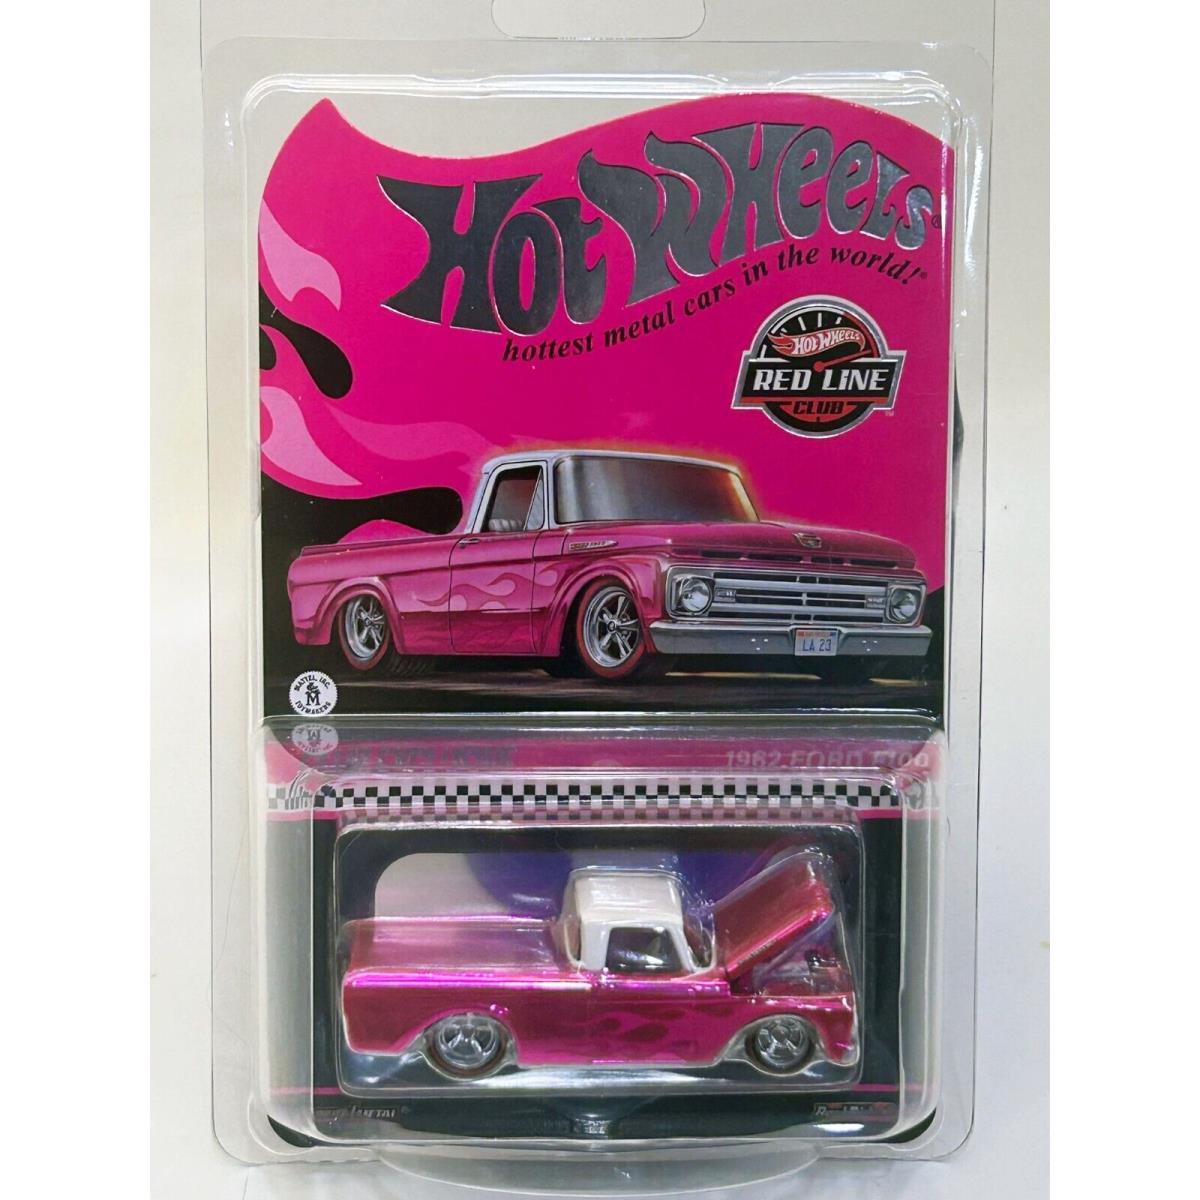 Hot Wheels 1962 Ford F100 LA 37th Collector Convention Rlc Redline Pink Party